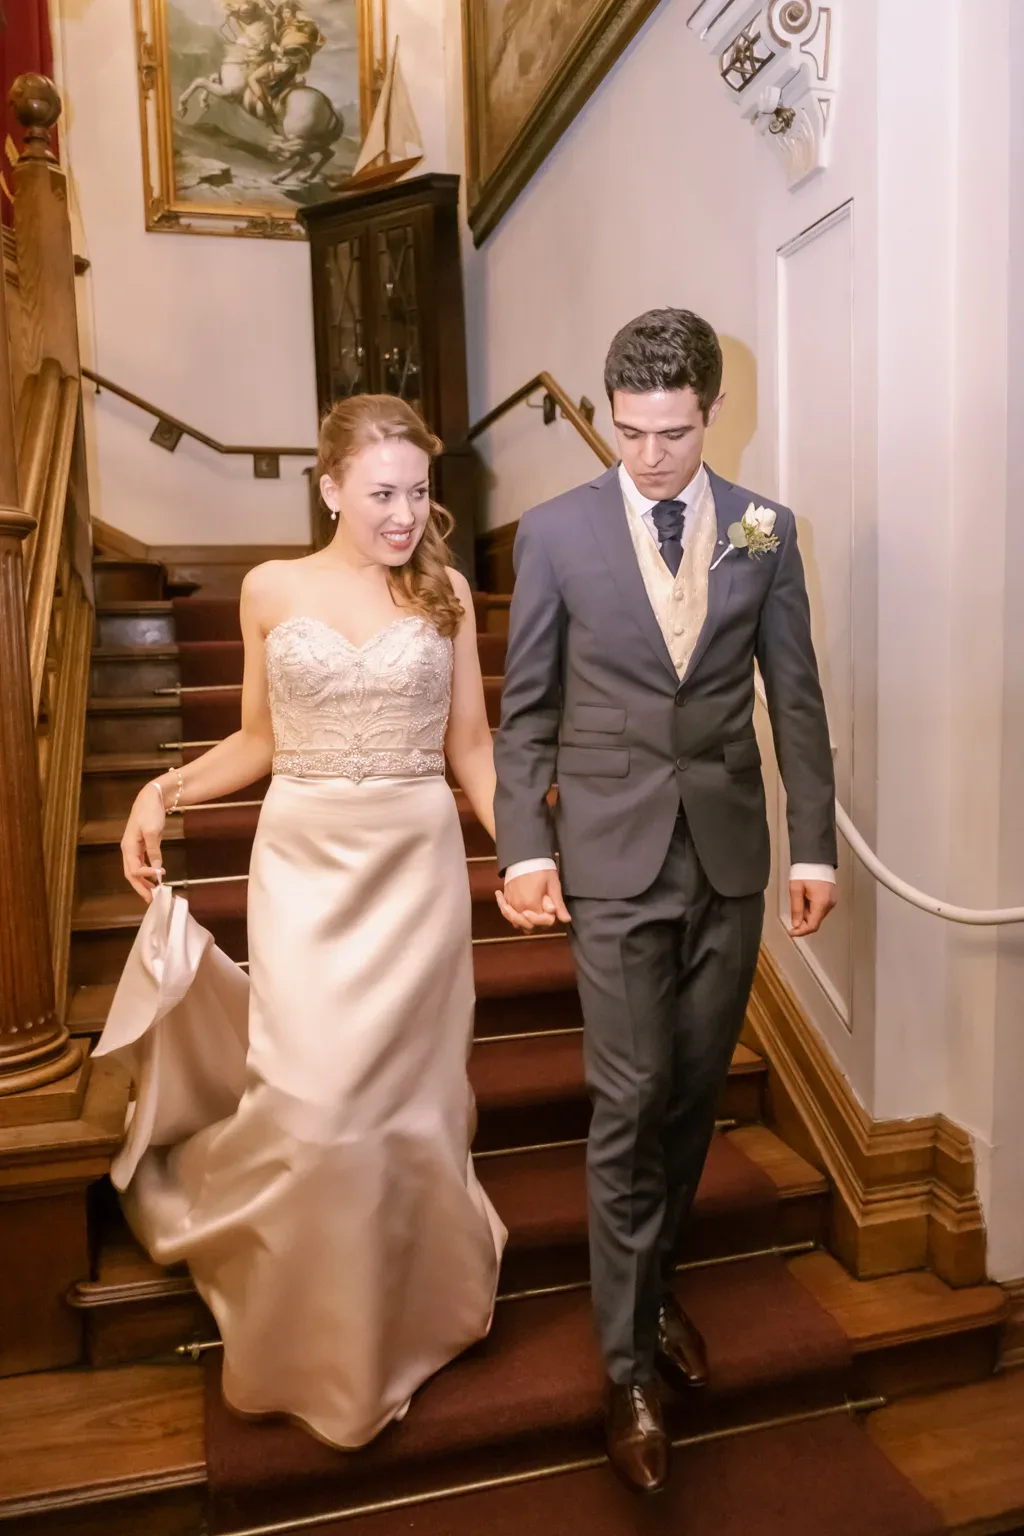 Orchardleigh Photo: a bride and groom walking down a flight of stairs.